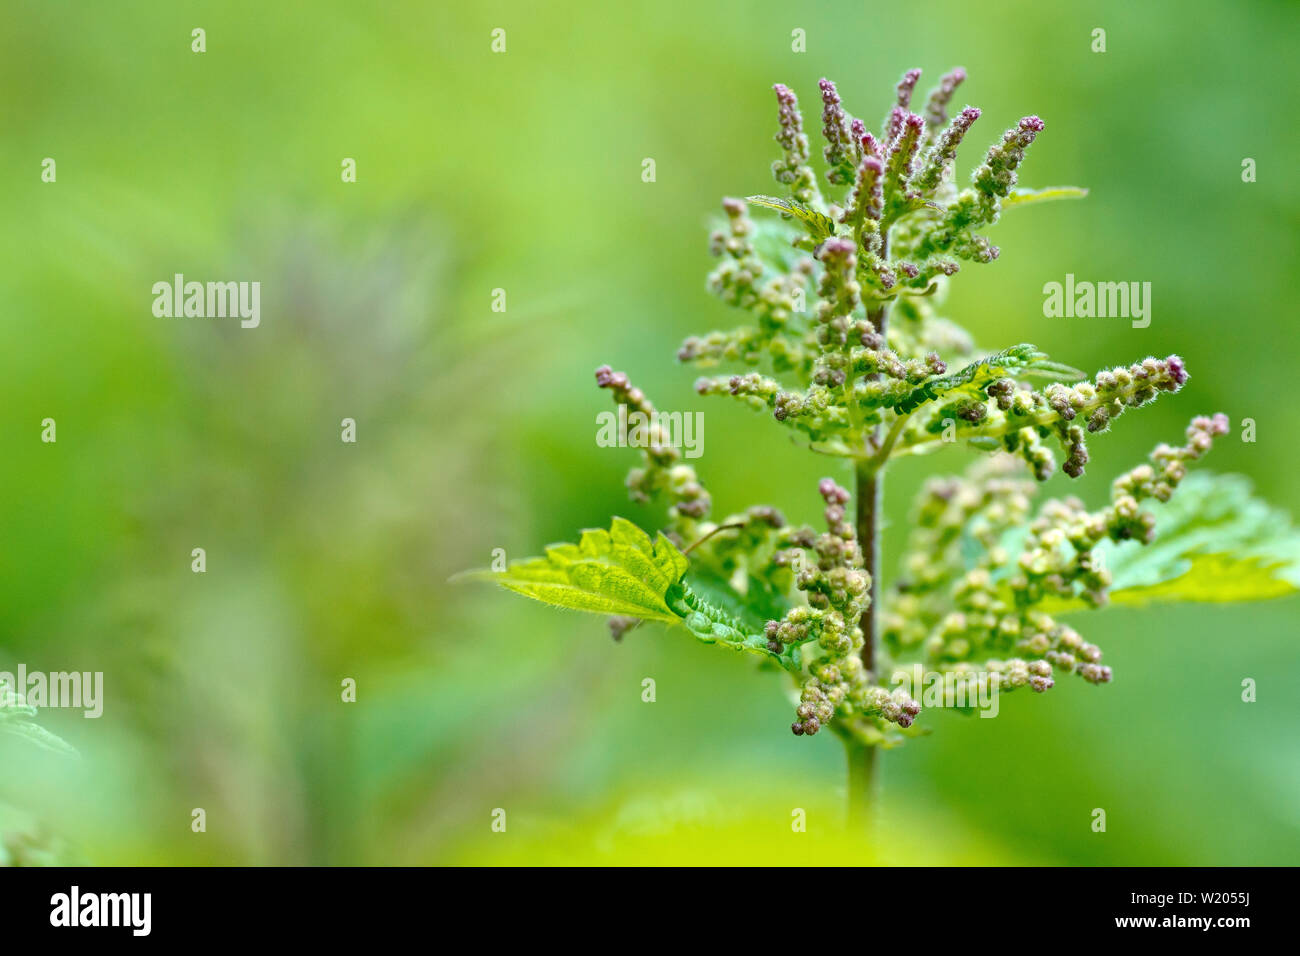 Stinging or Common Nettle (urtica dioica), close up of the tip of a young plant showing the tiny flower buds it produces. Stock Photo